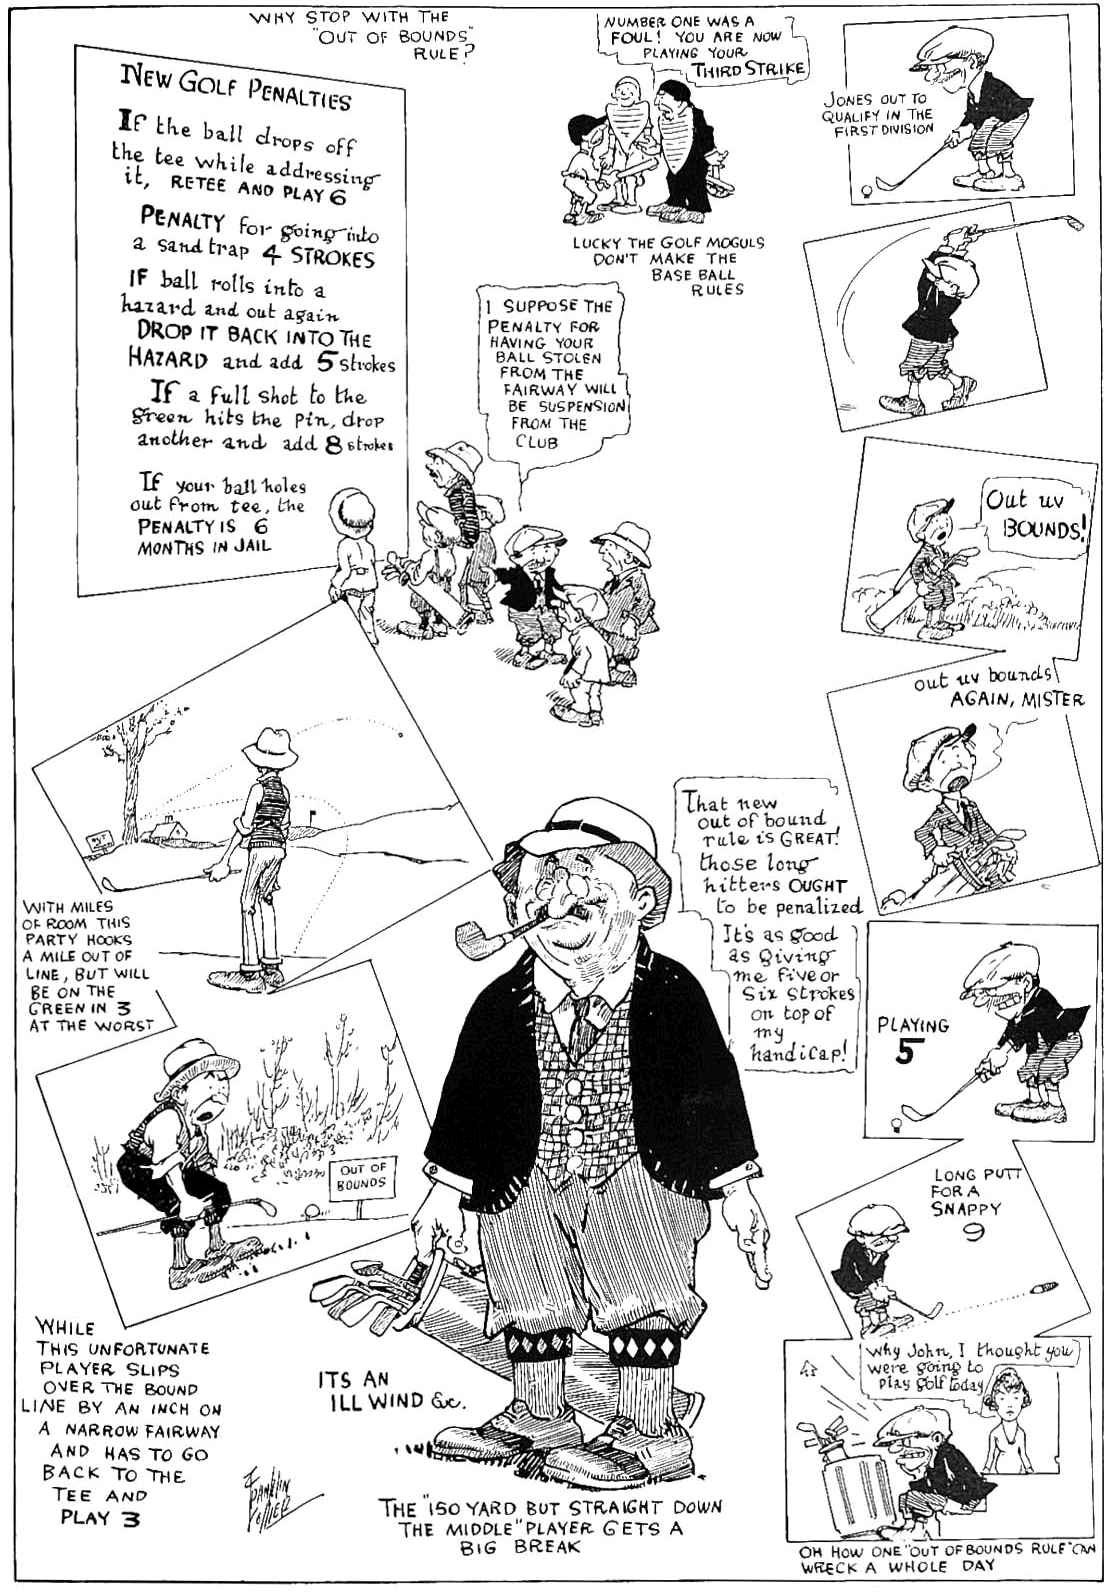 A vintage rules of golf cartoon from golf illustrated magazine.